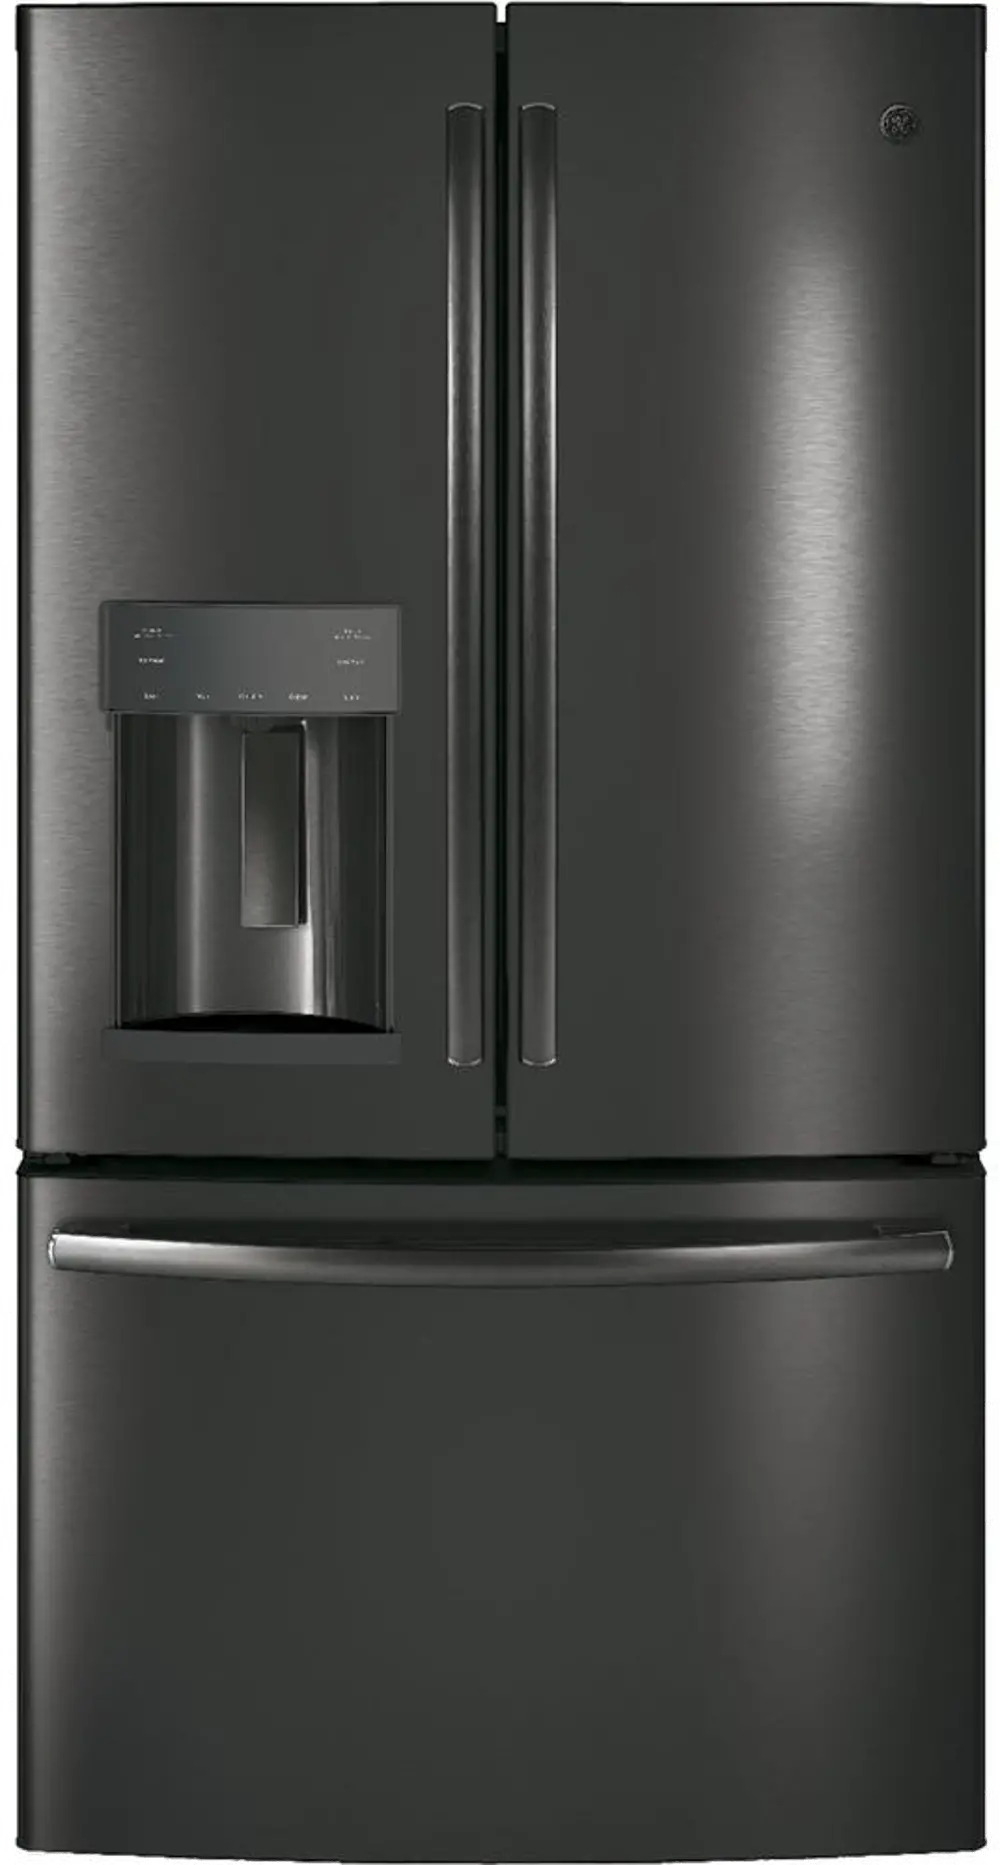 GFE28GBLTS GE 27.8 cu. ft. French-Door Refrigerator - 36 Inch Black Stainless Steel-1